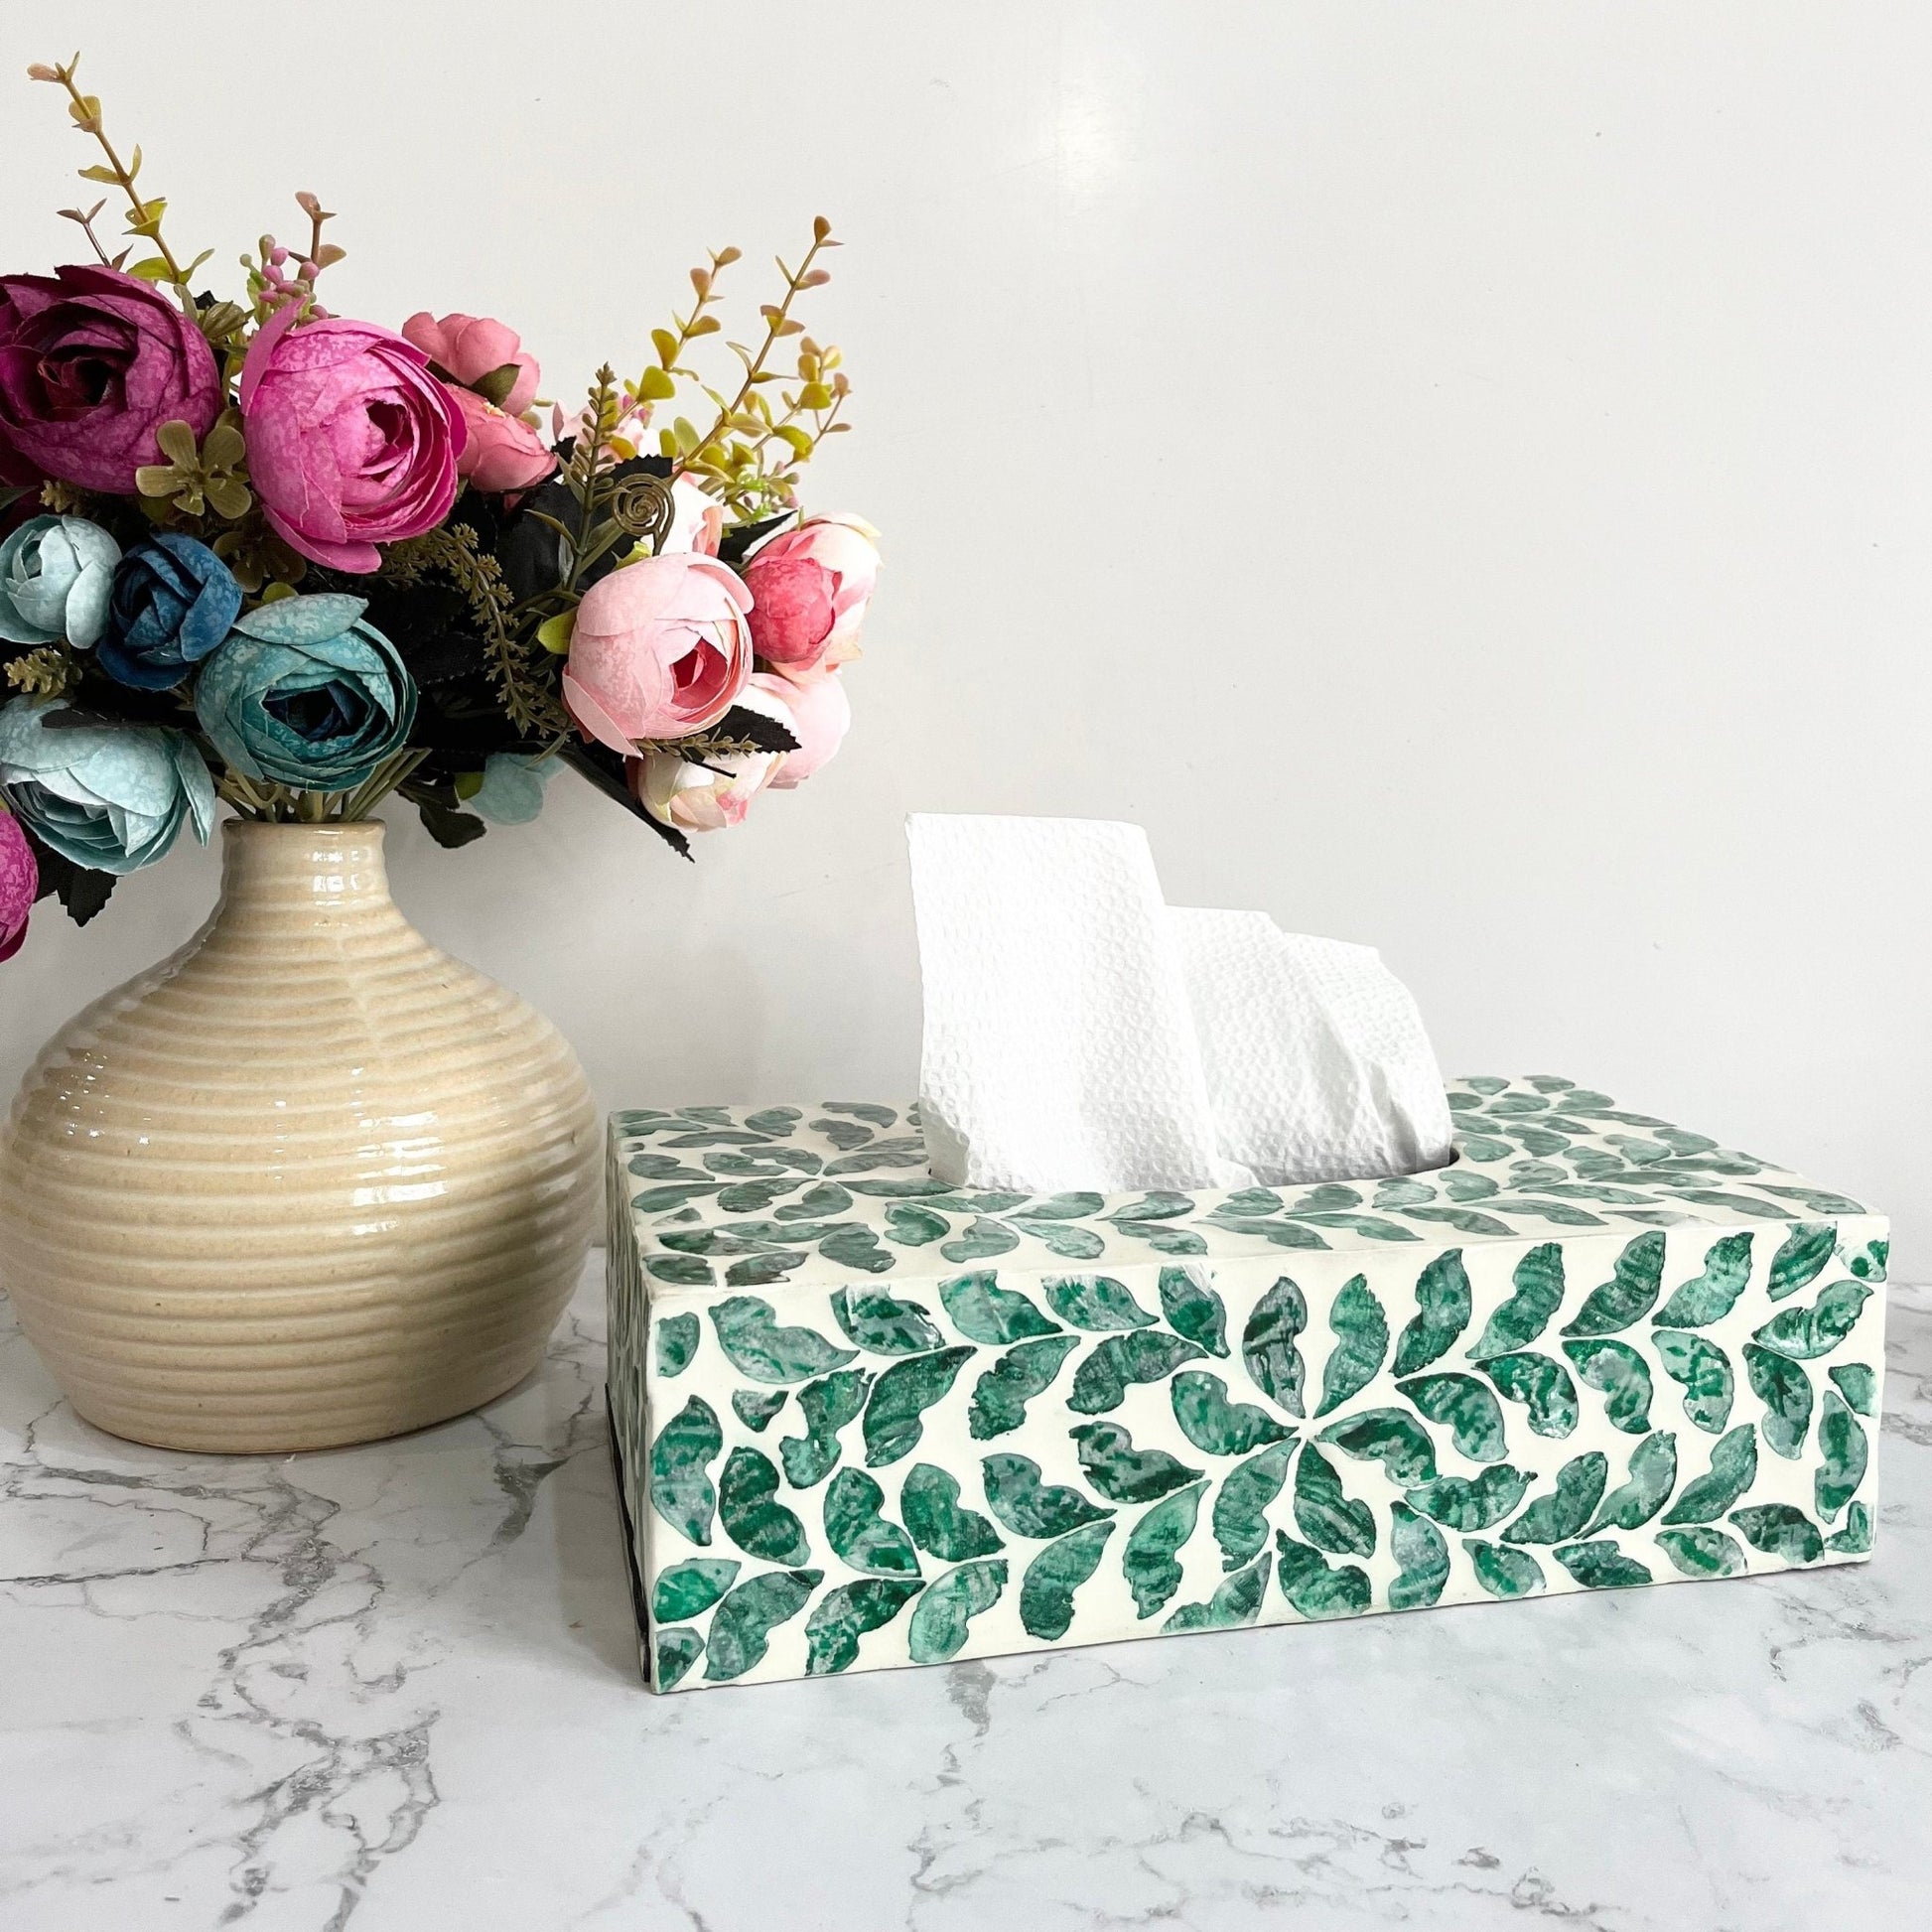 Mother of pearl inlay rectangle tissue box holder with green leaves patternPremiumWoodArt